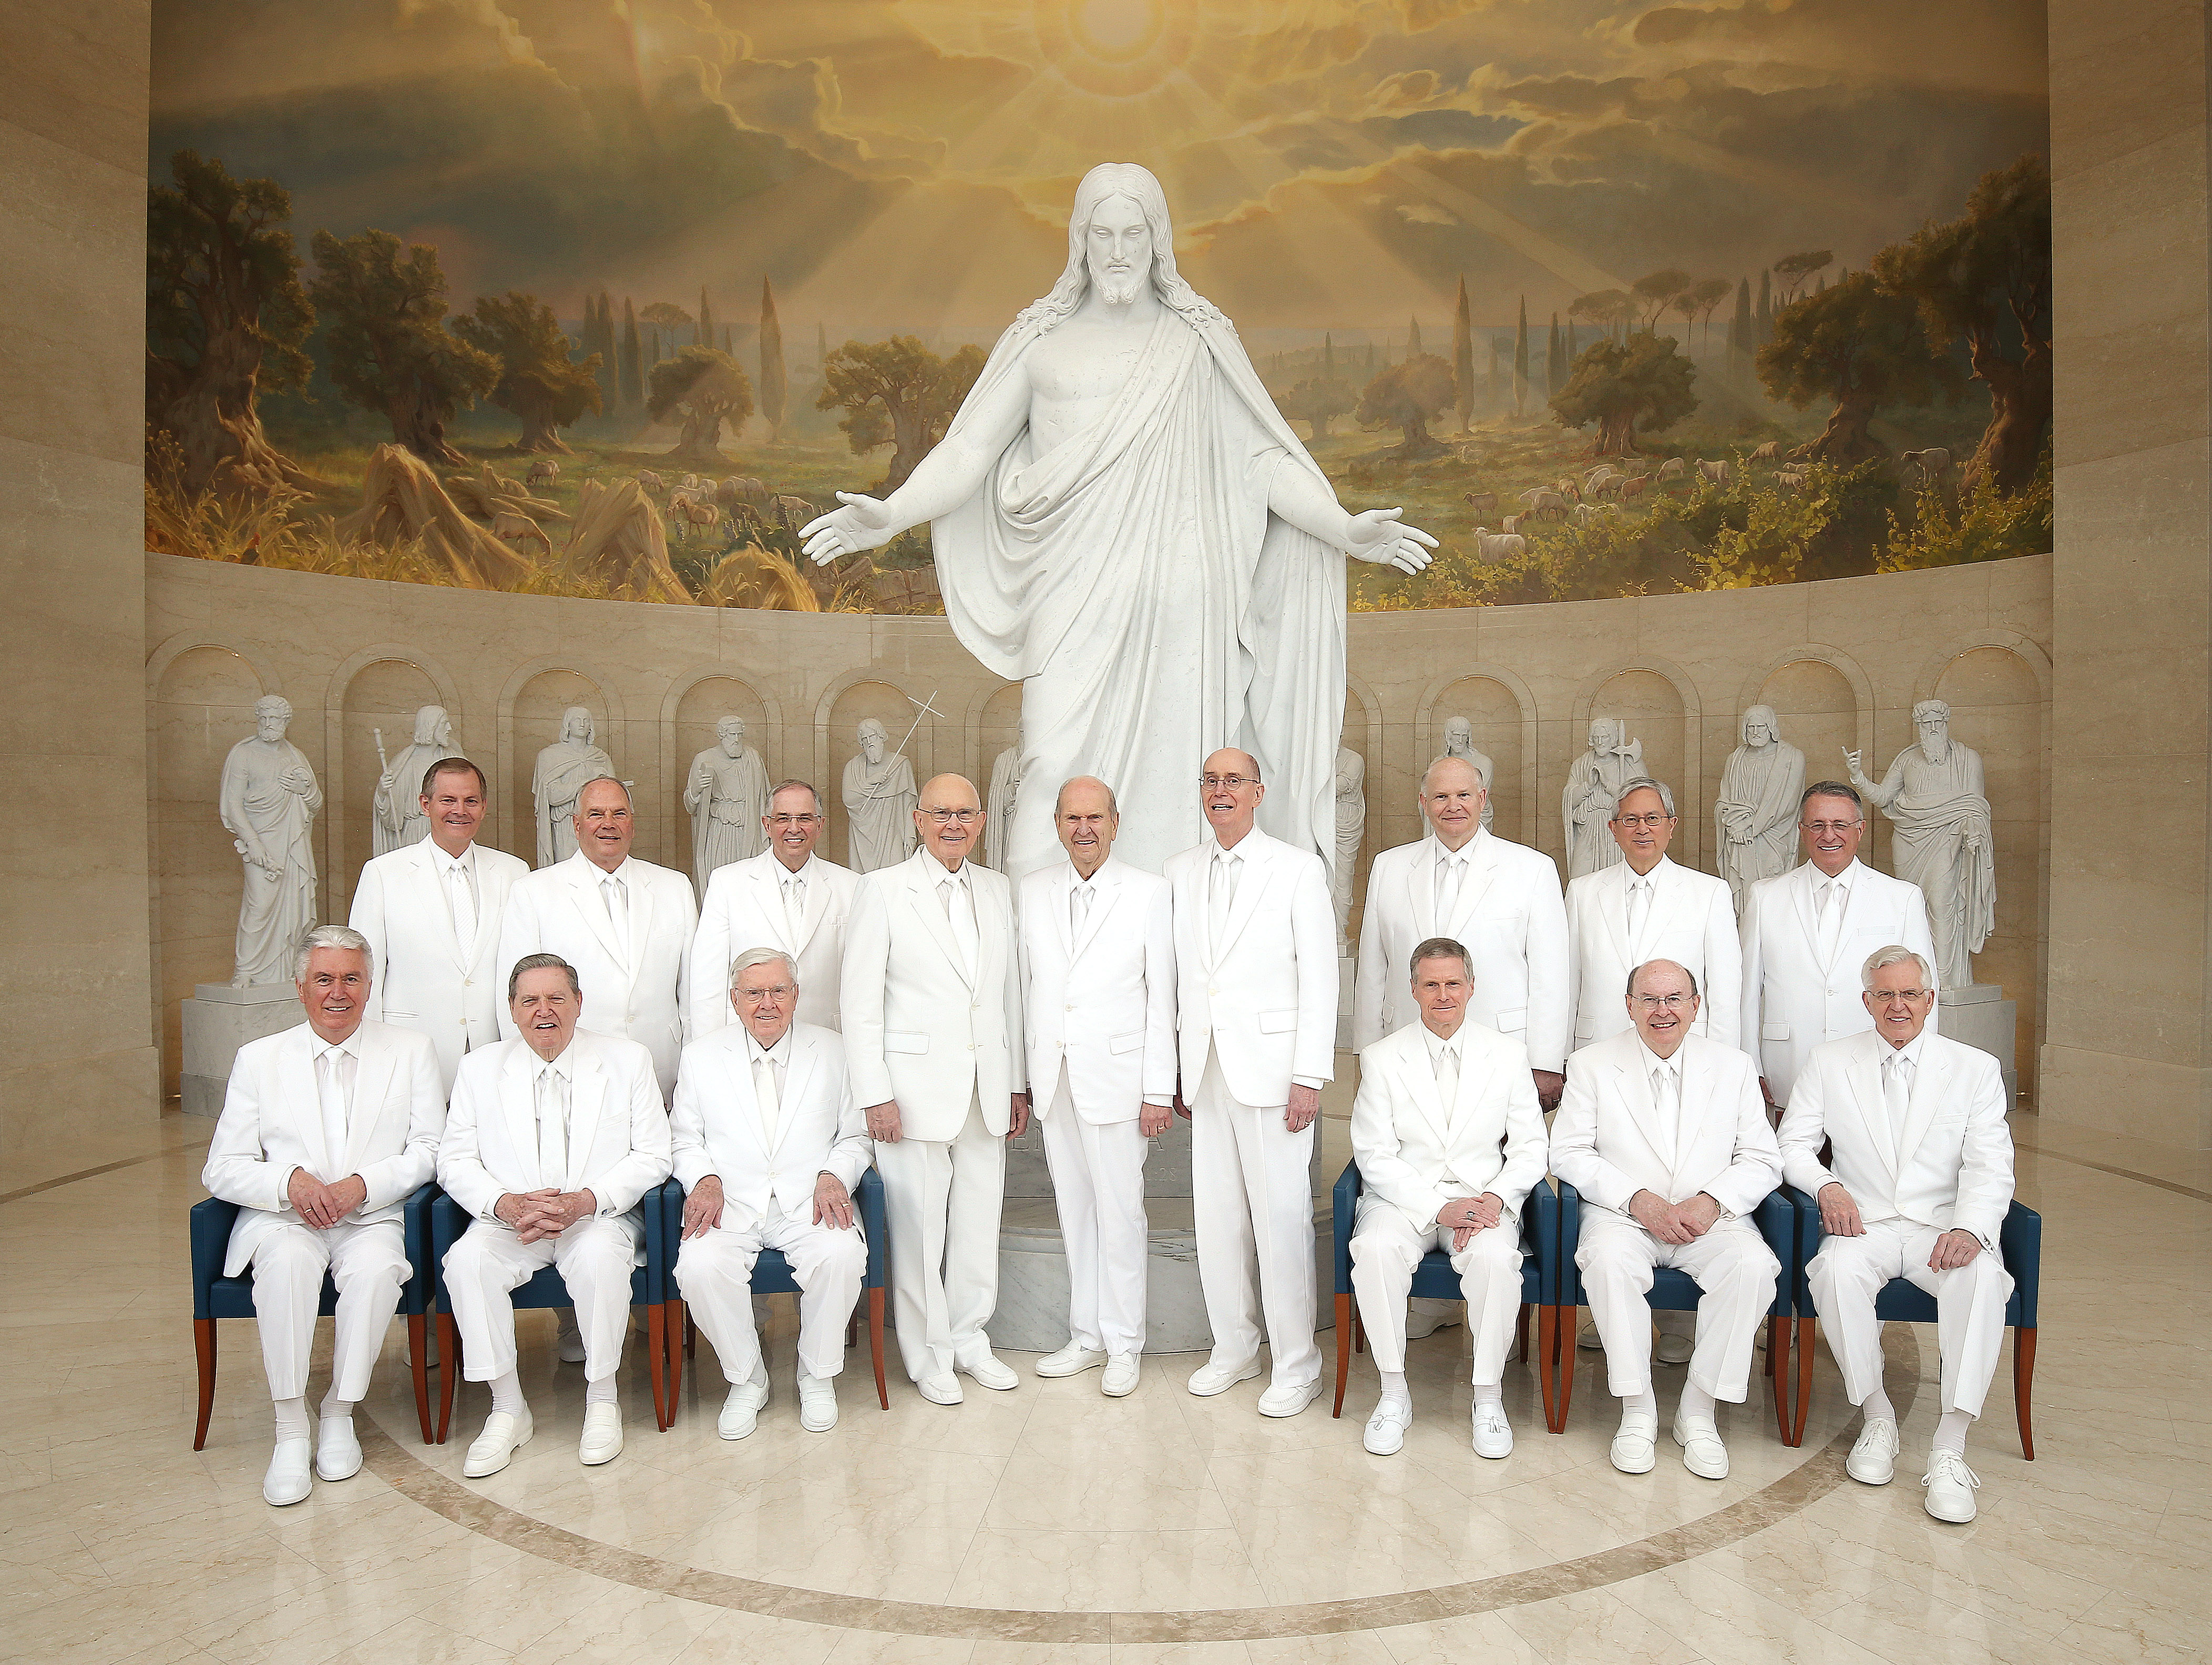 Iconic photo of First Presidency, Quorum of the Twelve Apostles shows